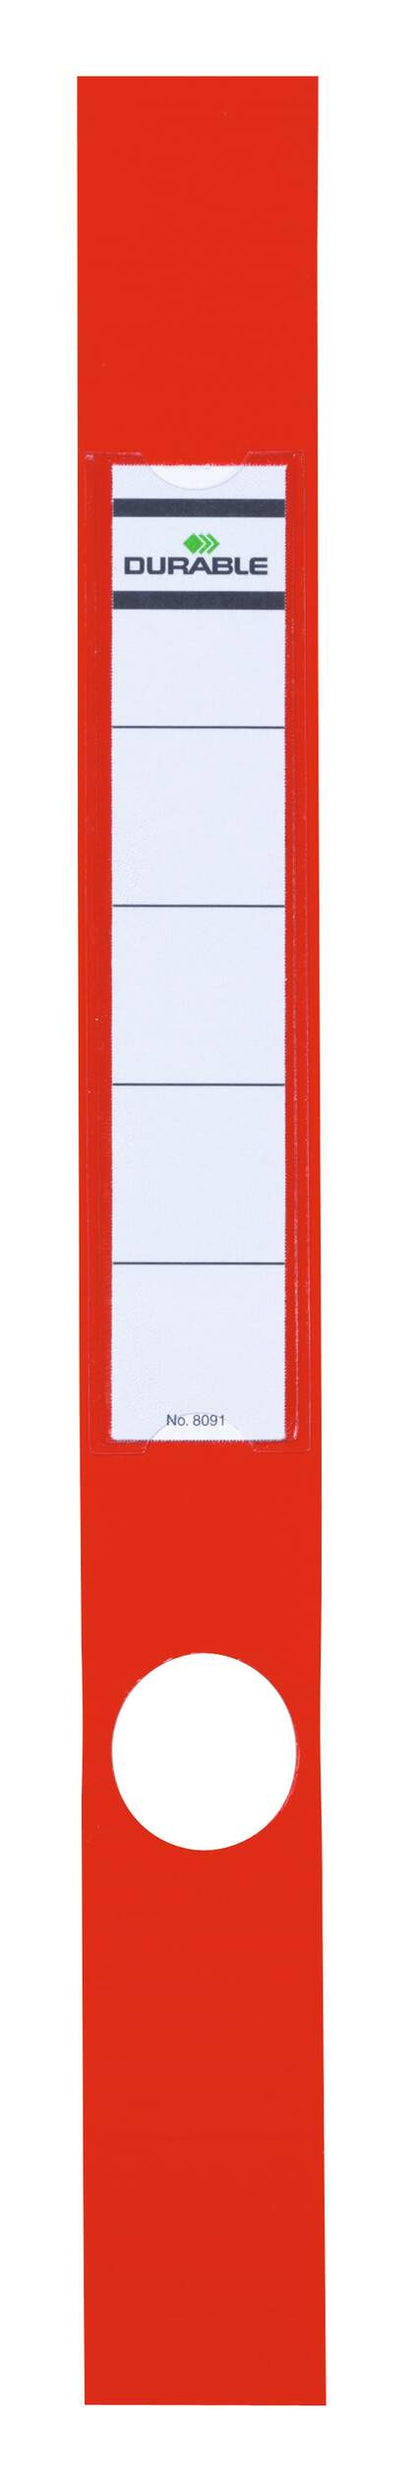 Durable ORDOFIX Adhesive Ring Binder Spine Labels | 10 Pack | 40mm Red